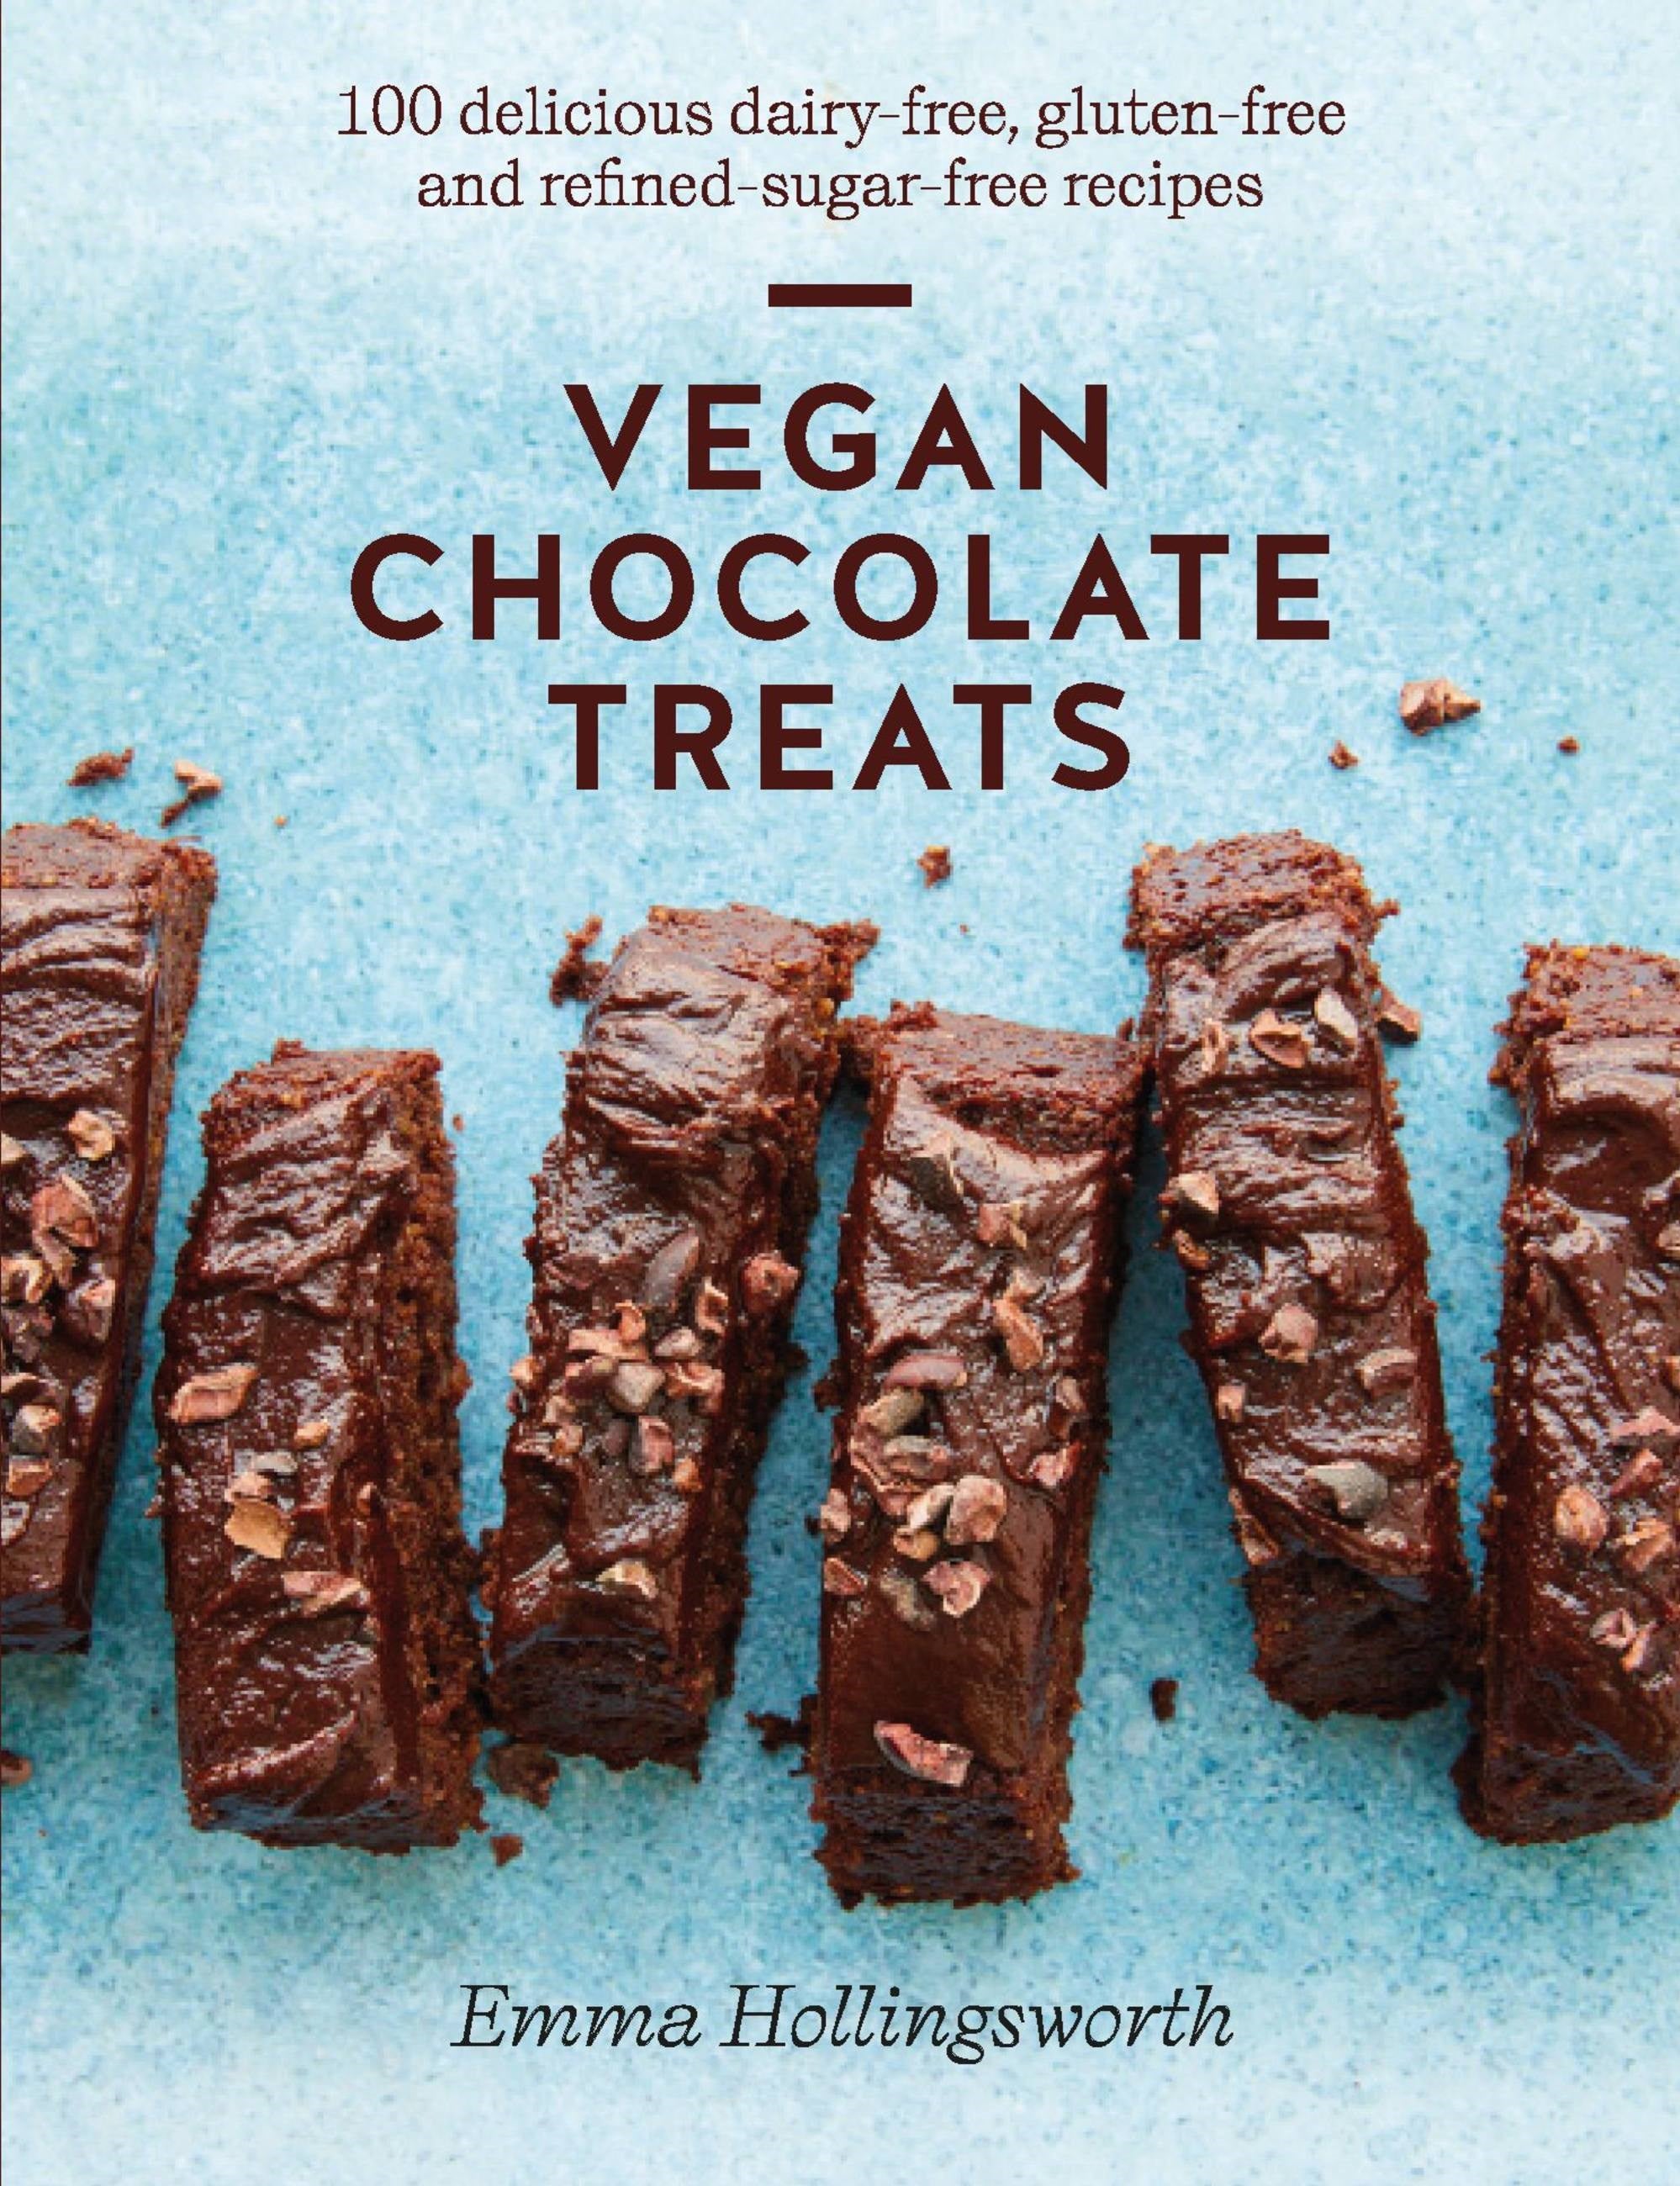 Vegan Chocolate Treats: 100 delicious dairy-free, gluten-free and refined-sugar-free recipes